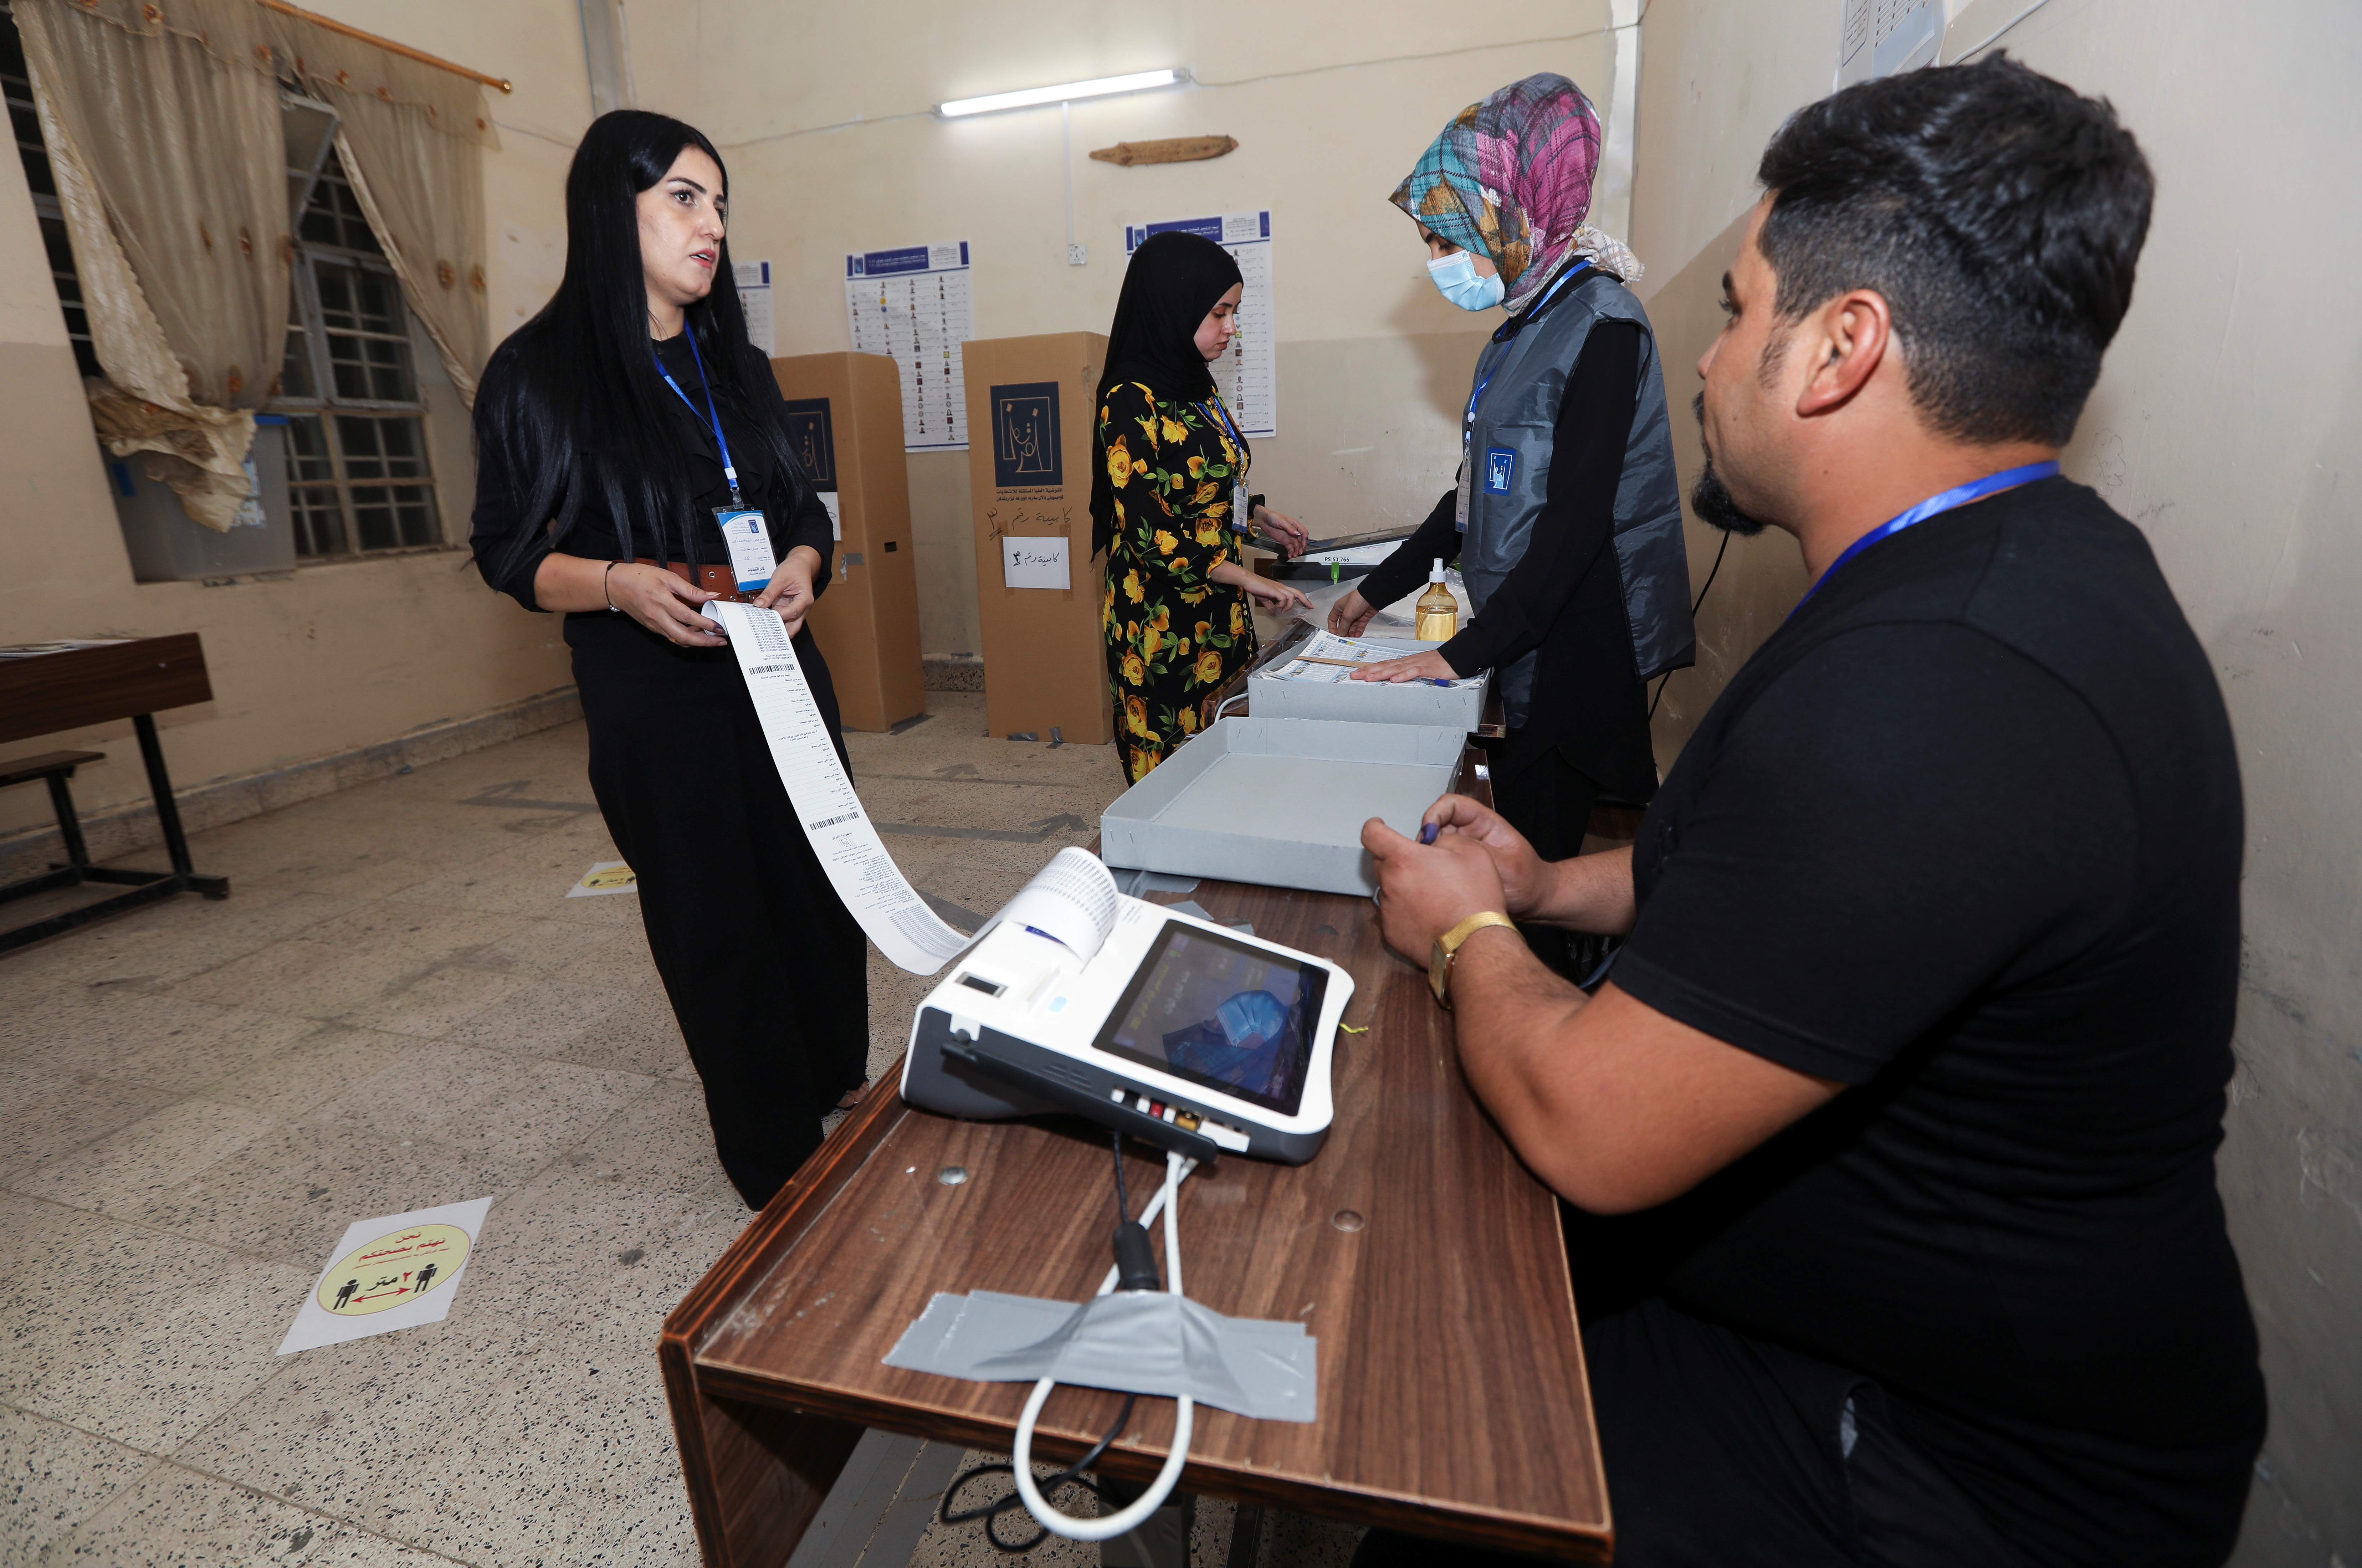 Iraqis vote in general election